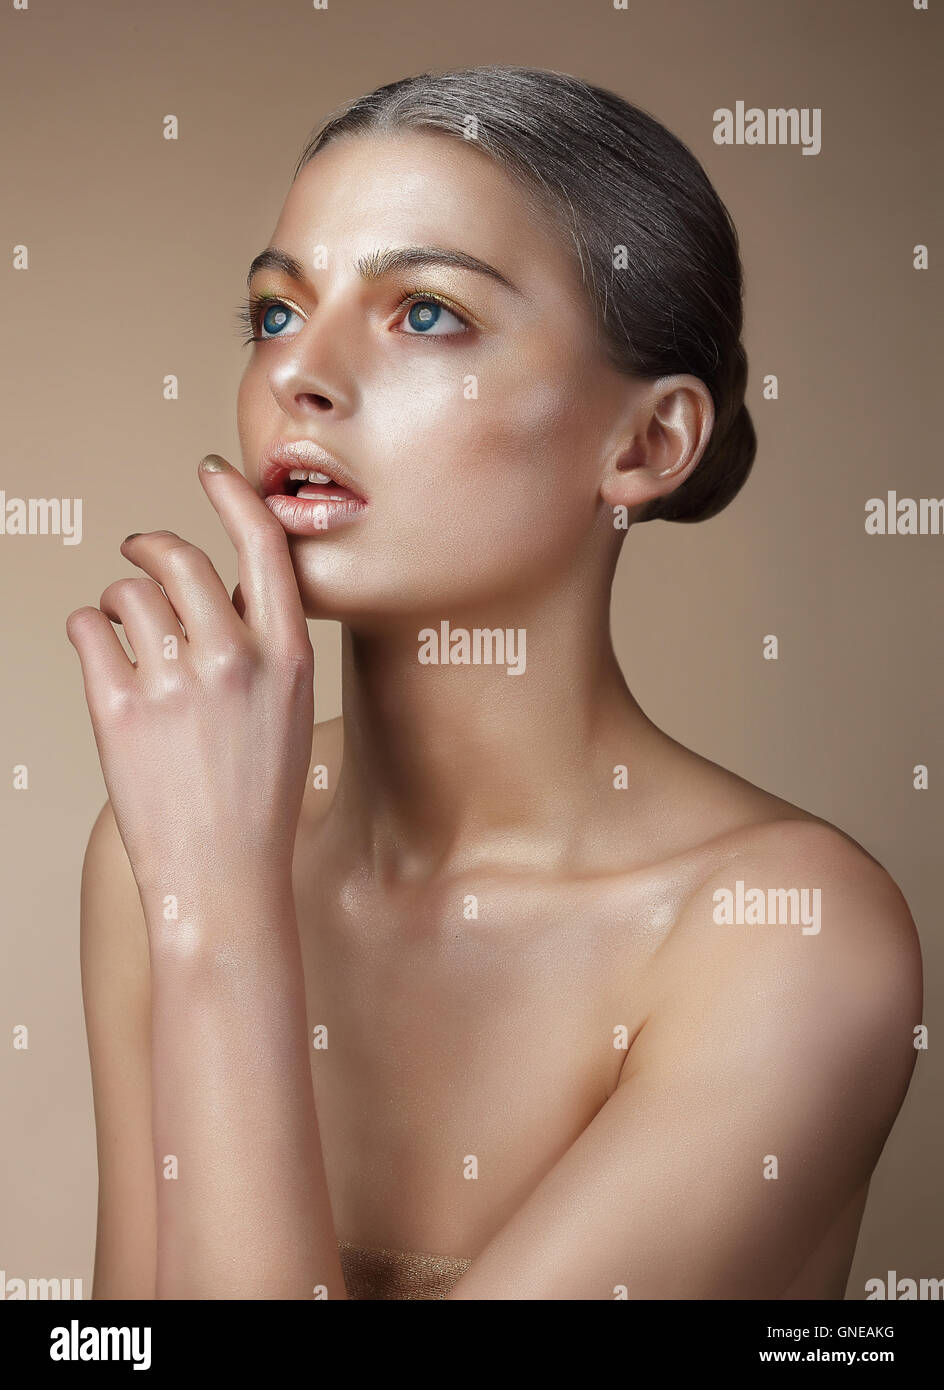 Portrait of a woman with golden skin. She looks up, a finger touches the lips. Stock Photo